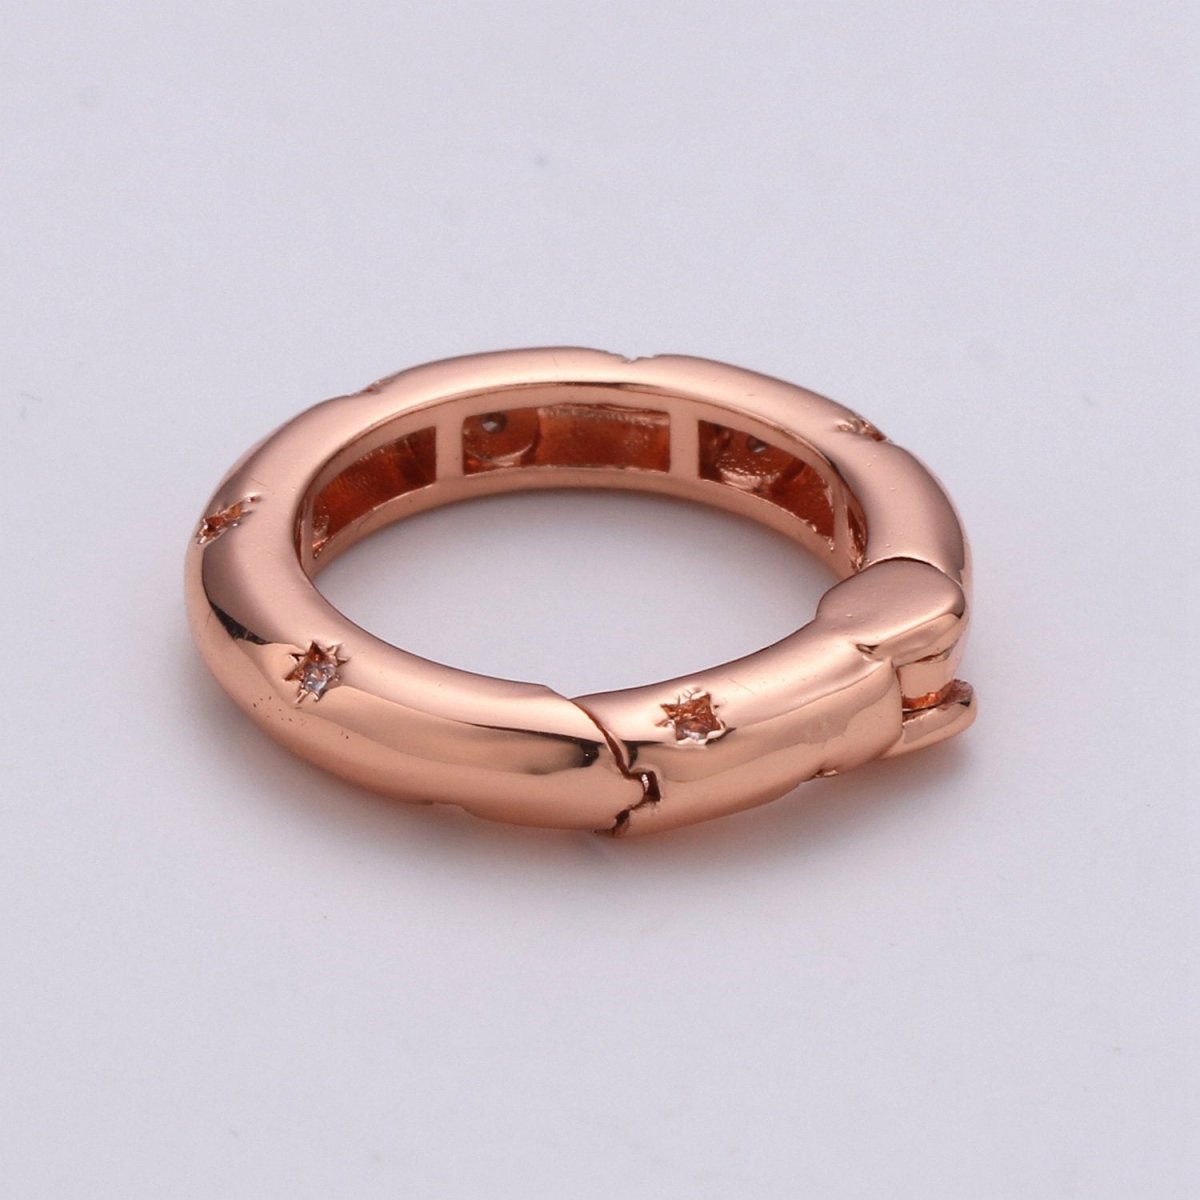 Cz Gold Spring Gate Ring, Push Gate ring, 20mm Round Ring Charm Holder Rose Gold Black Gun Metal Silver Clasp for Connector Charm Holder K-851 - DLUXCA